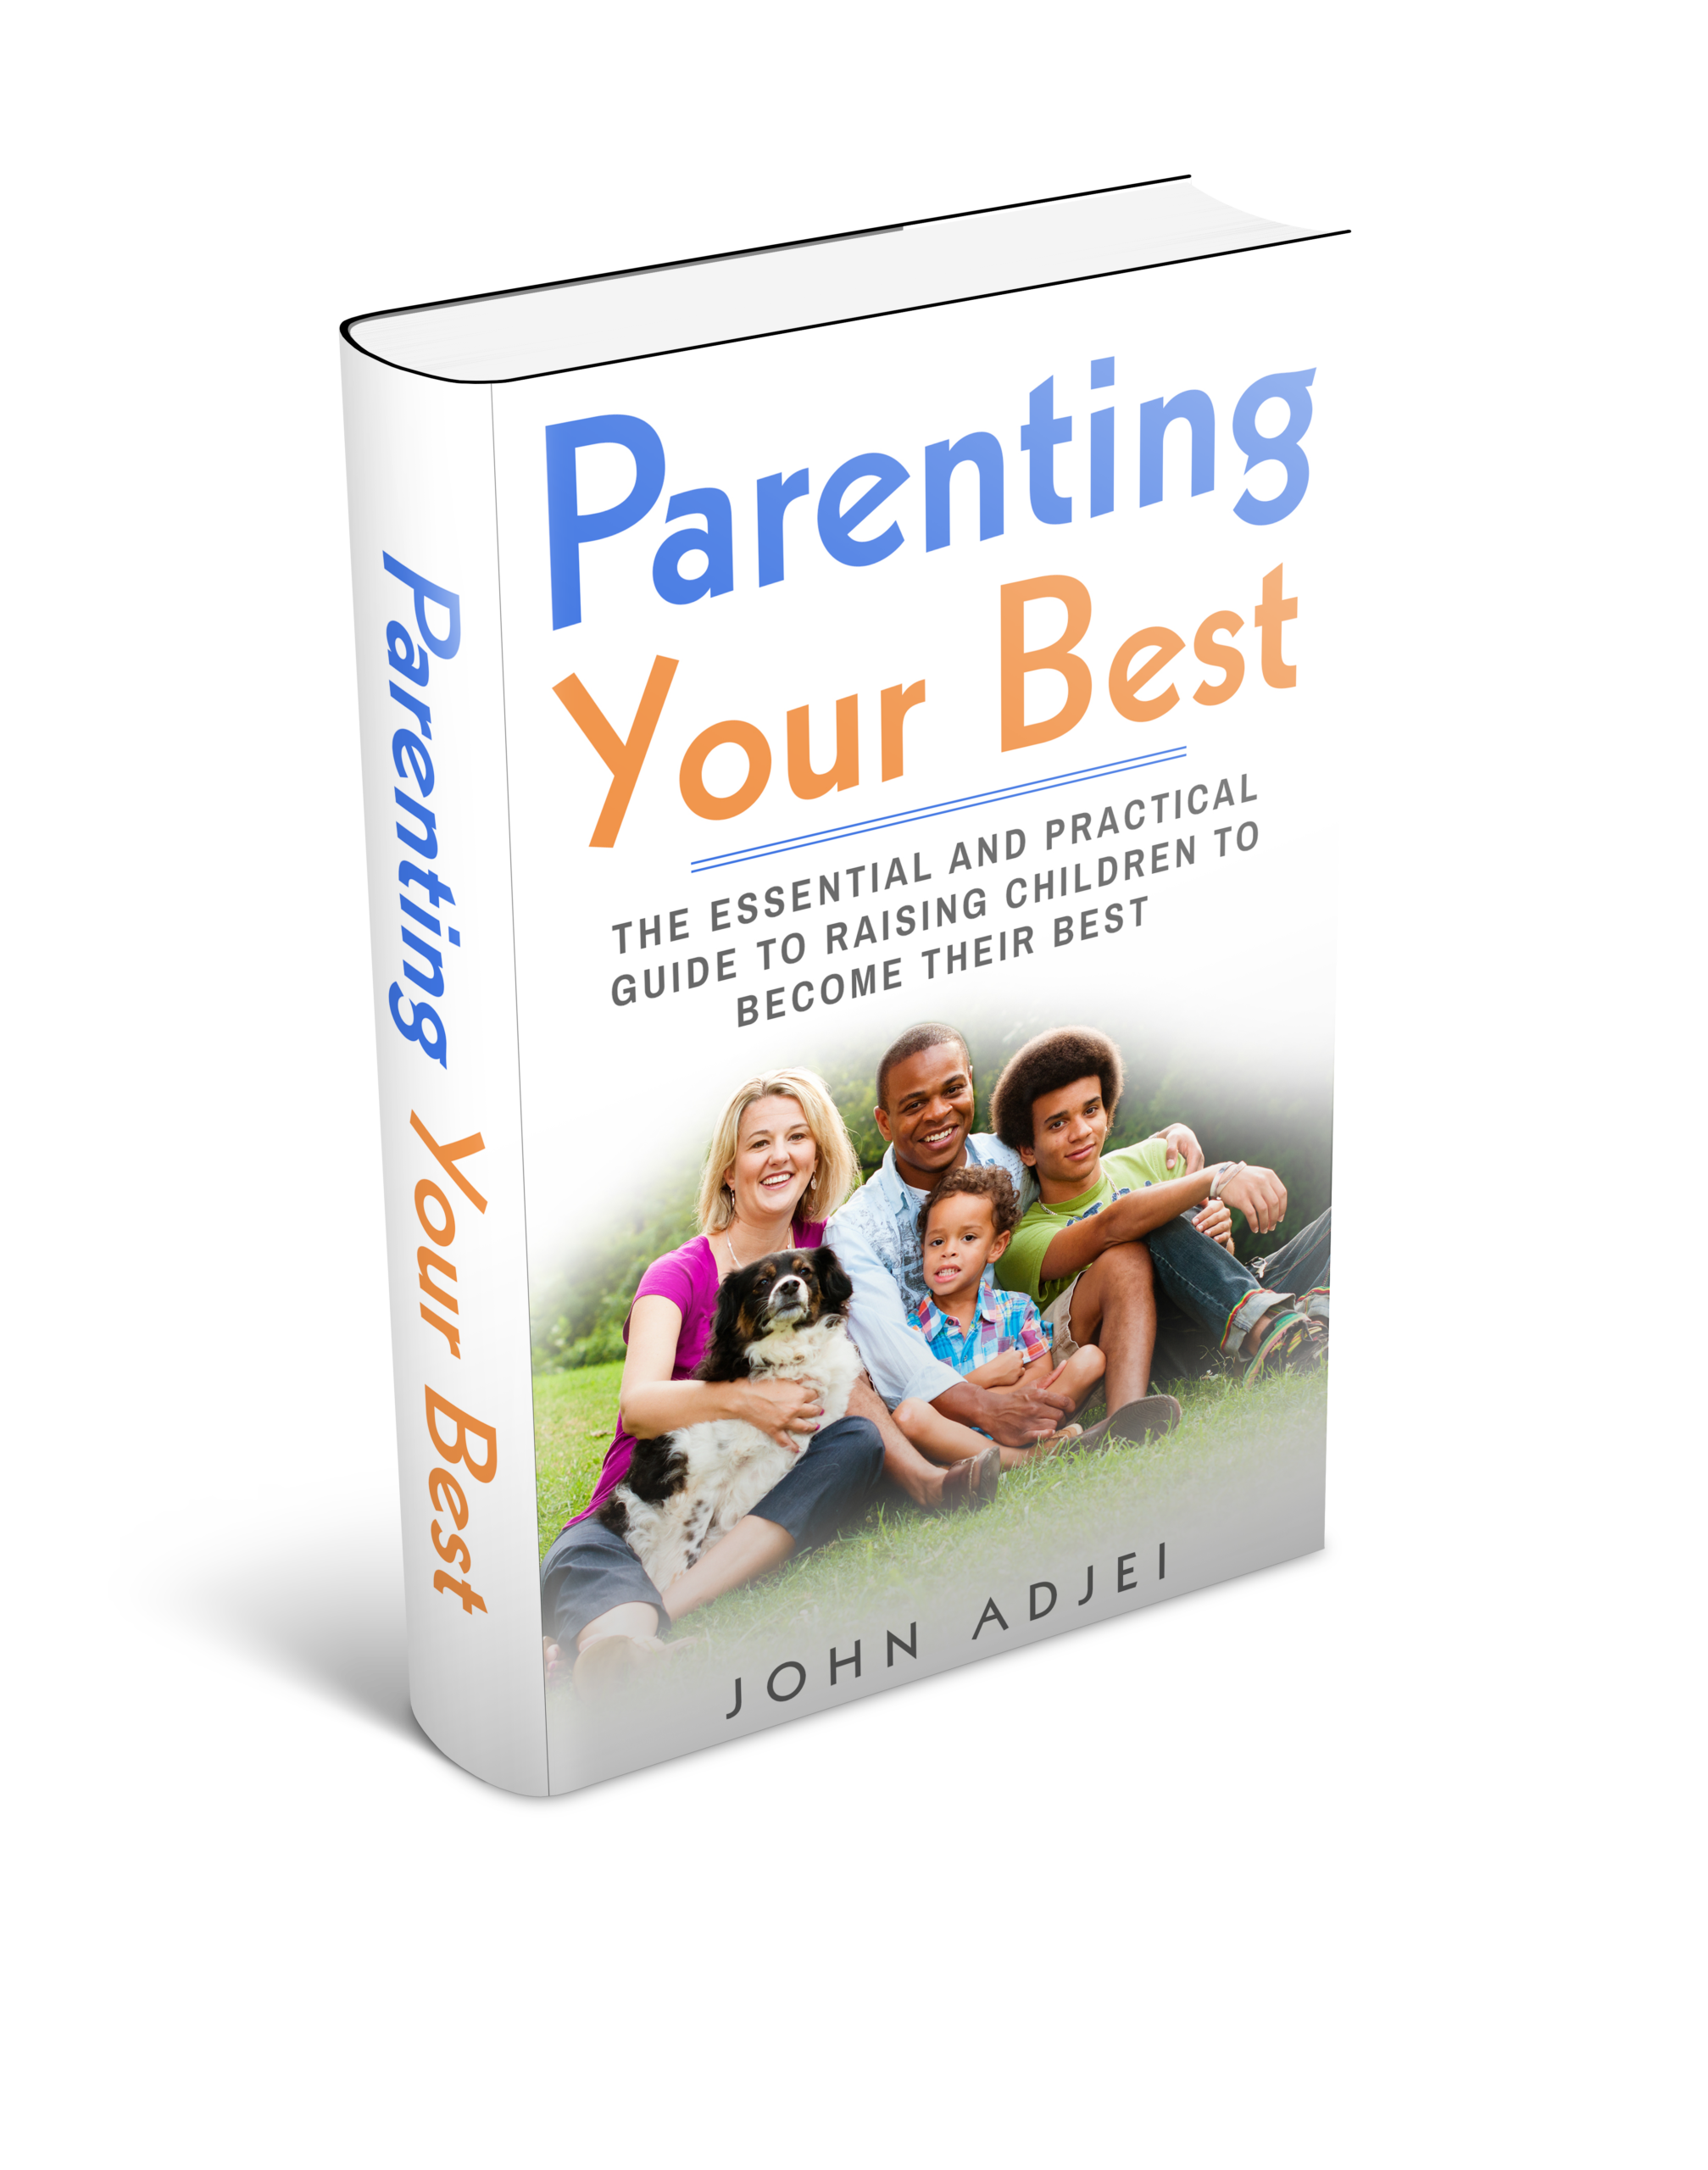 FREE: Parenting Your Best: The Essential and Practical Guide to Raising Children to Become their Best by John Adjei